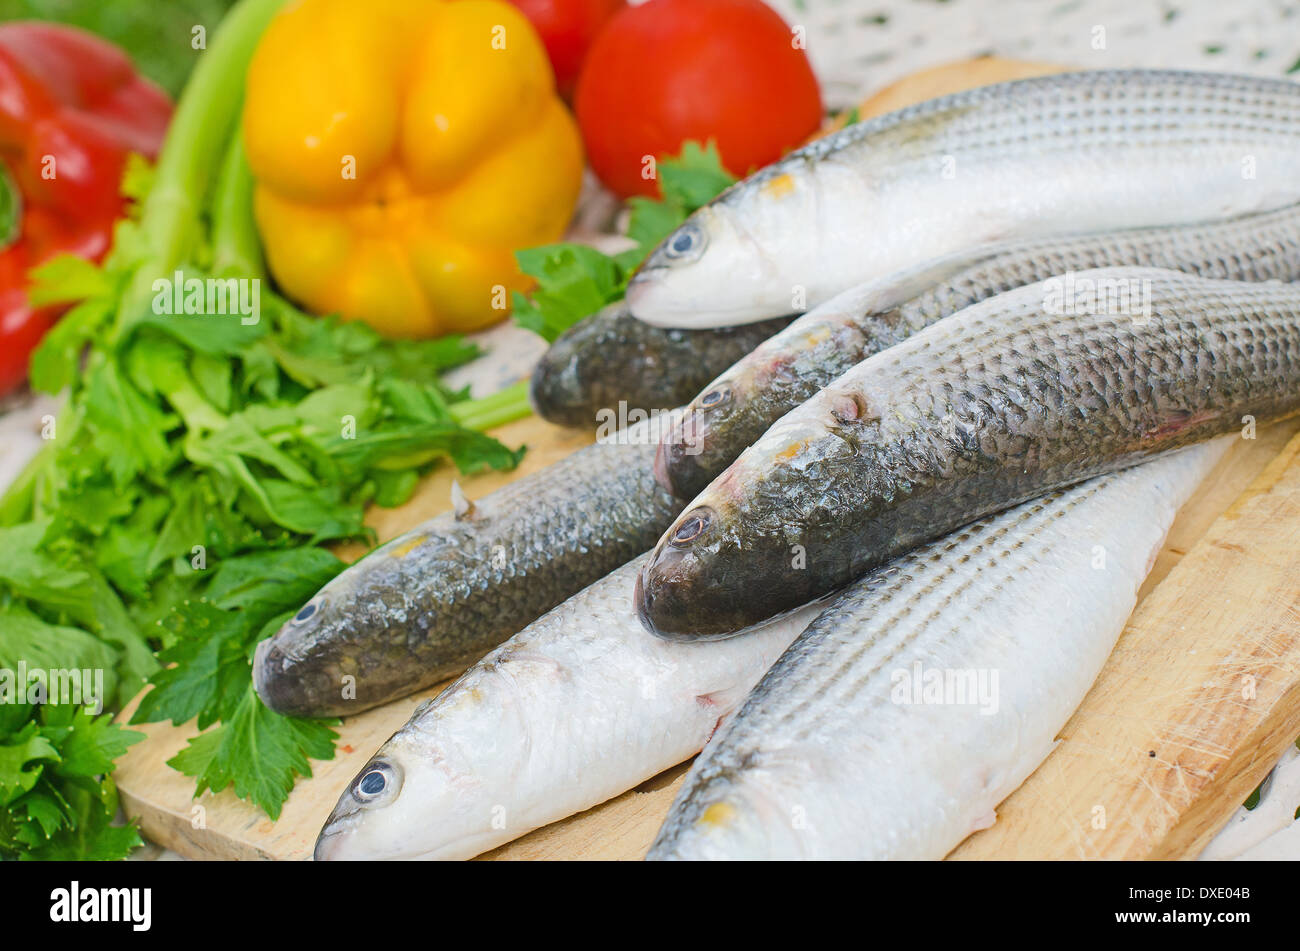 Mugil cephalus fish with vegetables. Stock Photo